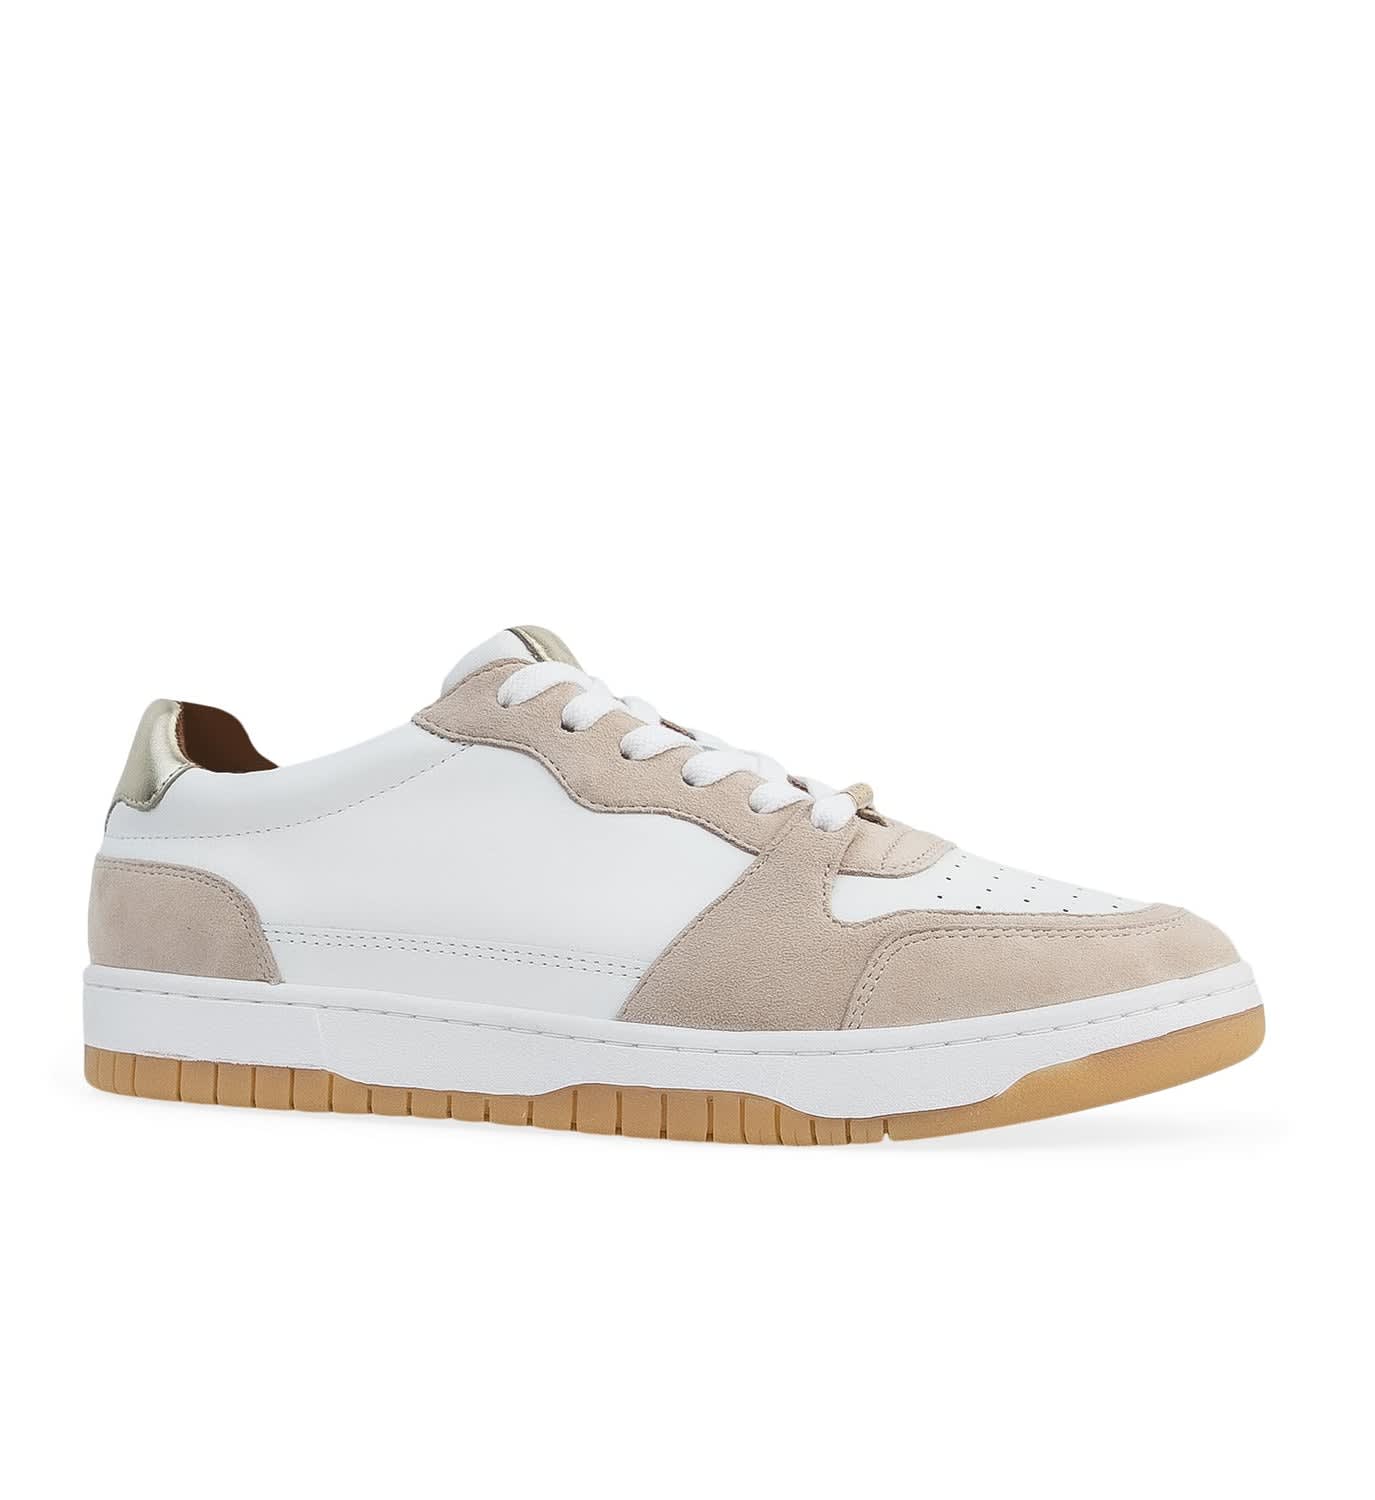 Tui White Leather & Sand Suede Sneakers | Bared Footwear